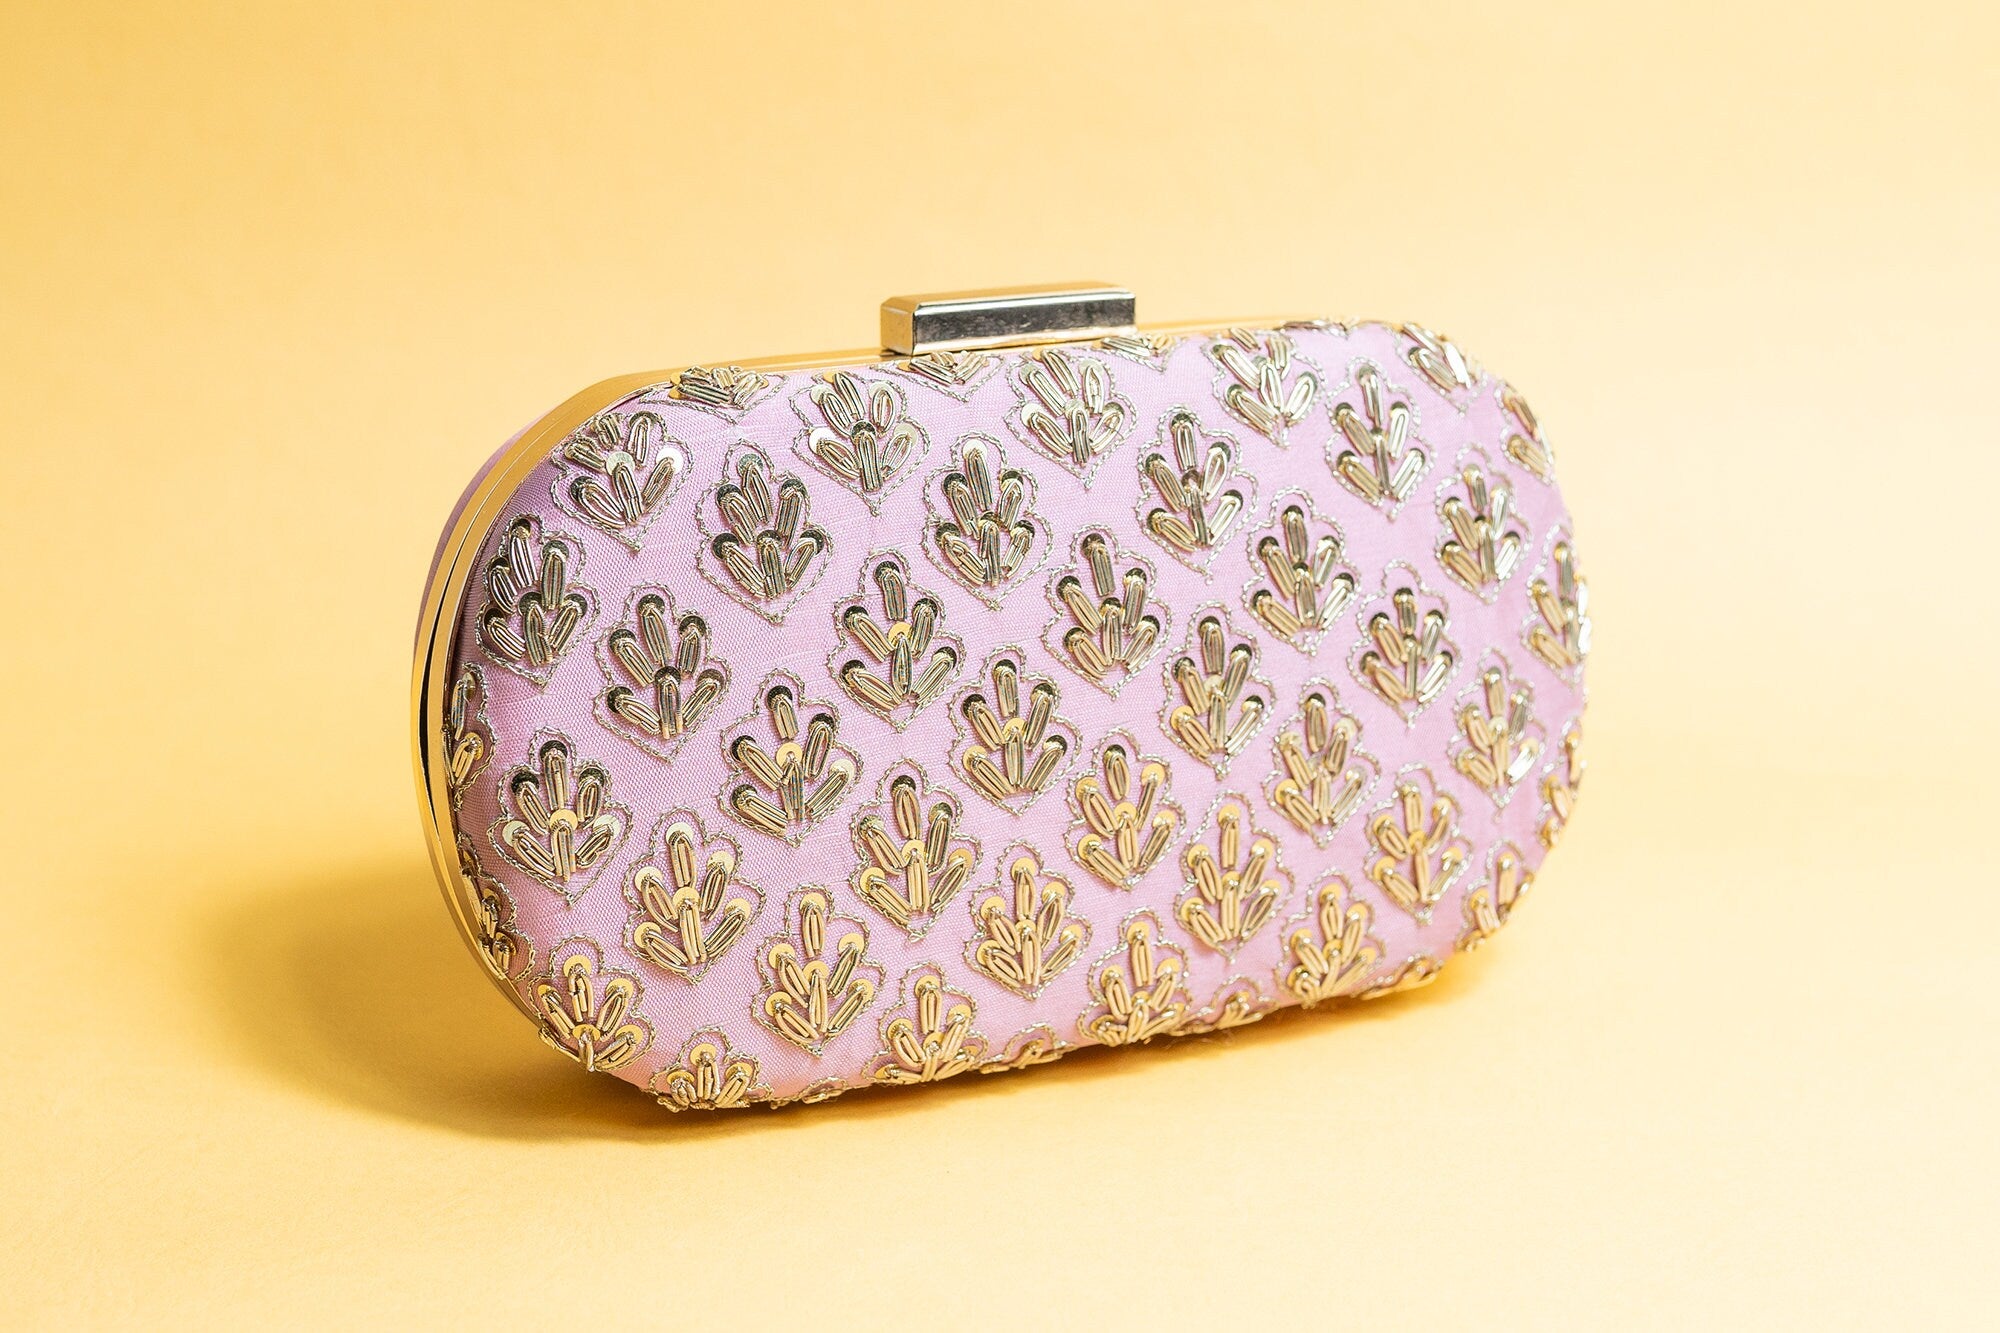 Pink metal embroidery clutch bag with detachable sling